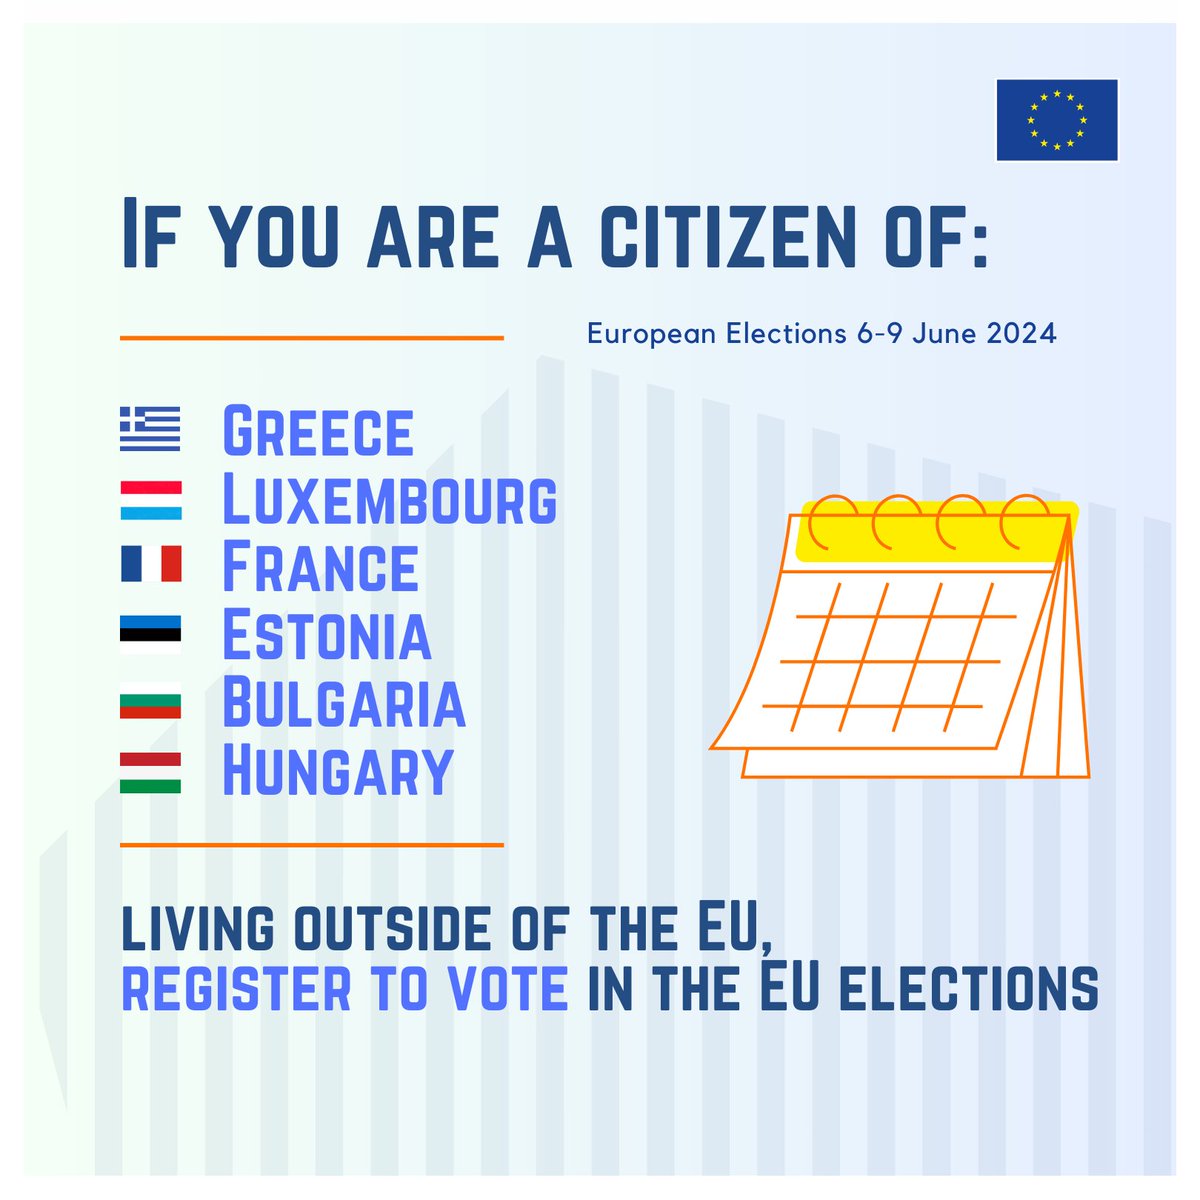 Be a voter in the #EUelections2024! If you live outside of the EU, register to #UseYourVote. Here are the upcoming deadlines: 🇬🇷 Greece: 29/04 🇱🇺 Luxembourg: 30/04 🇫🇷 France: 03/05 🇪🇪 Estonia: 10/05 🇧🇬 Bulgaria: 15/05 or 31/05 🇭🇺 Hungary:15/05 More: europa.eu/!bnhXDQ.